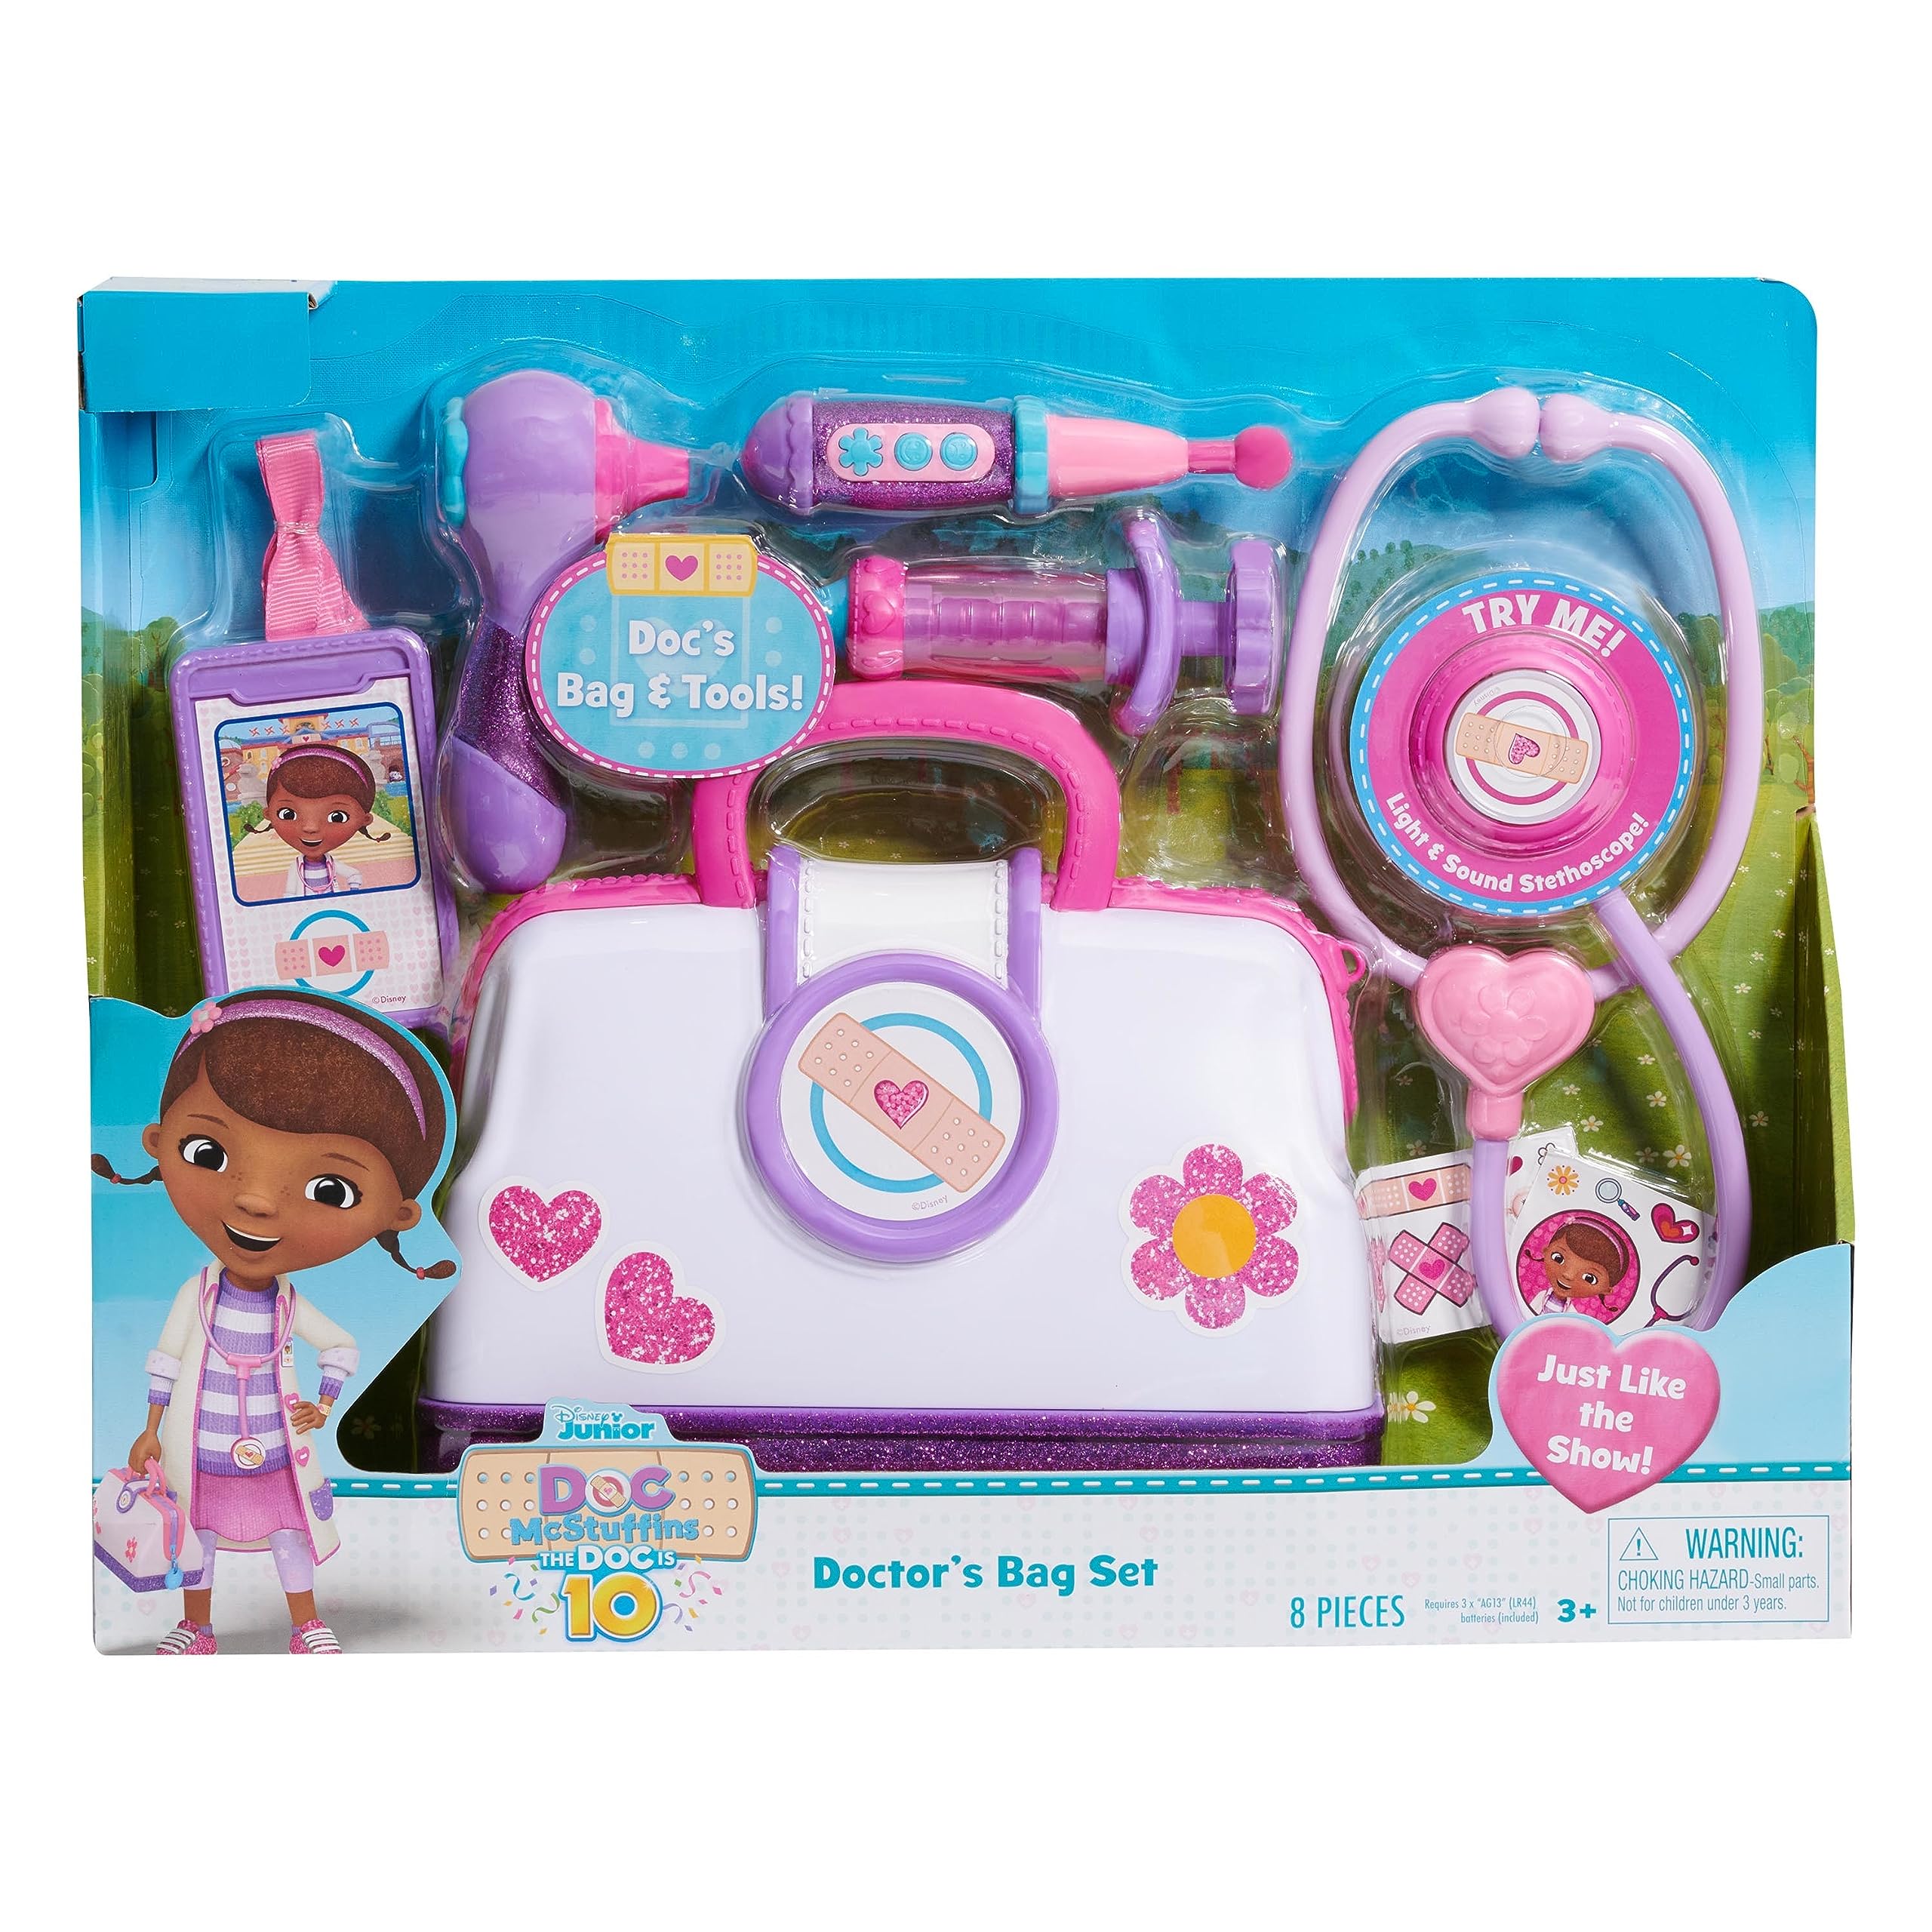 Disney Junior Doc McStuffins Toy Hospital Doctor's Bag Set, 7-piece Dress Up and Pretend Play Doctor Kit, Officially Licensed Kids Toys for Ages 3 Up, Gifts and Presents by Just Play